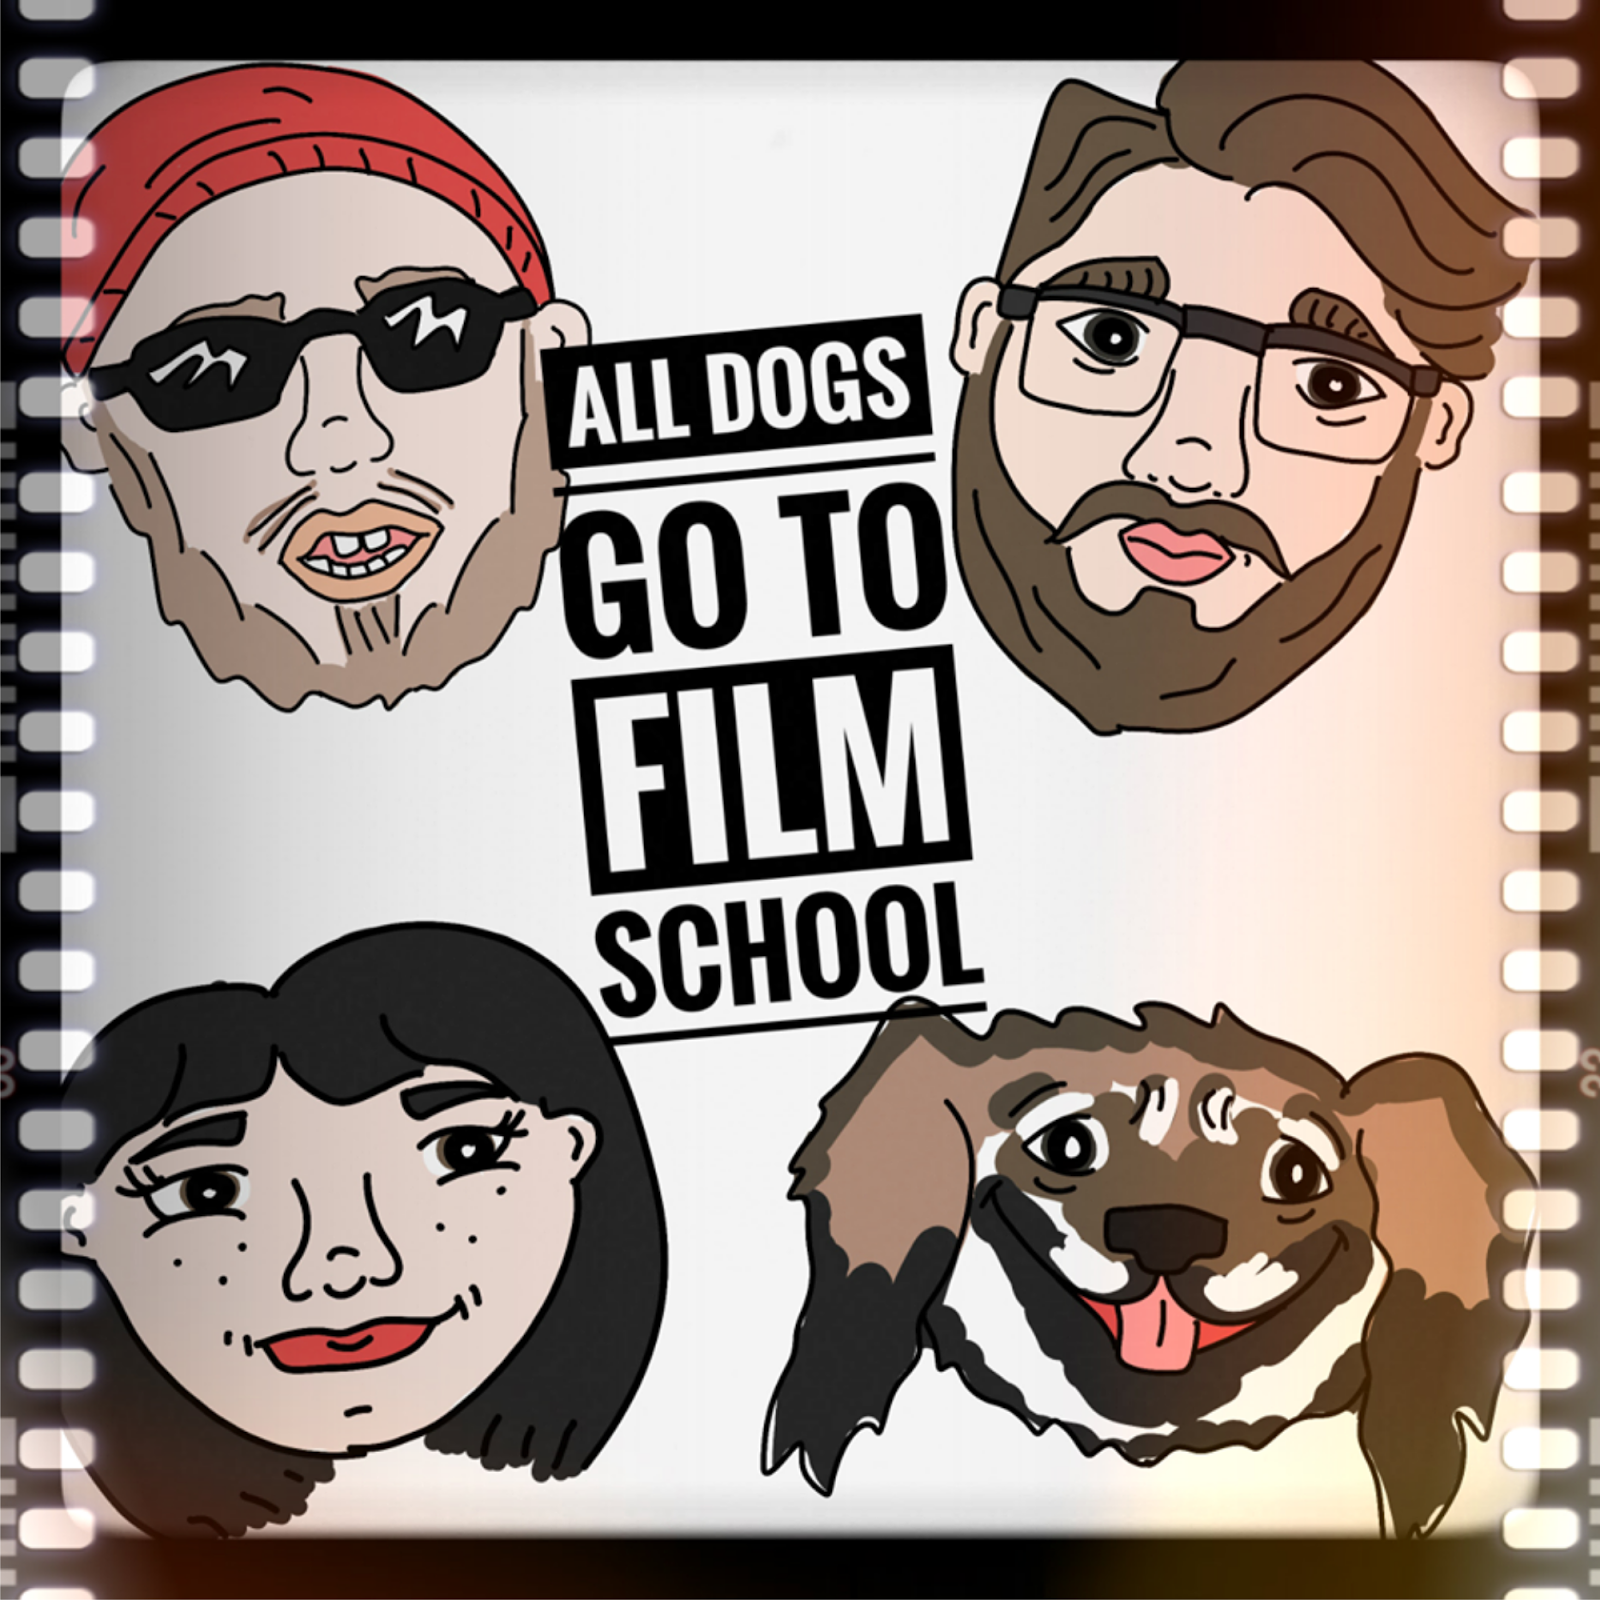 All Dogs Go to Film School